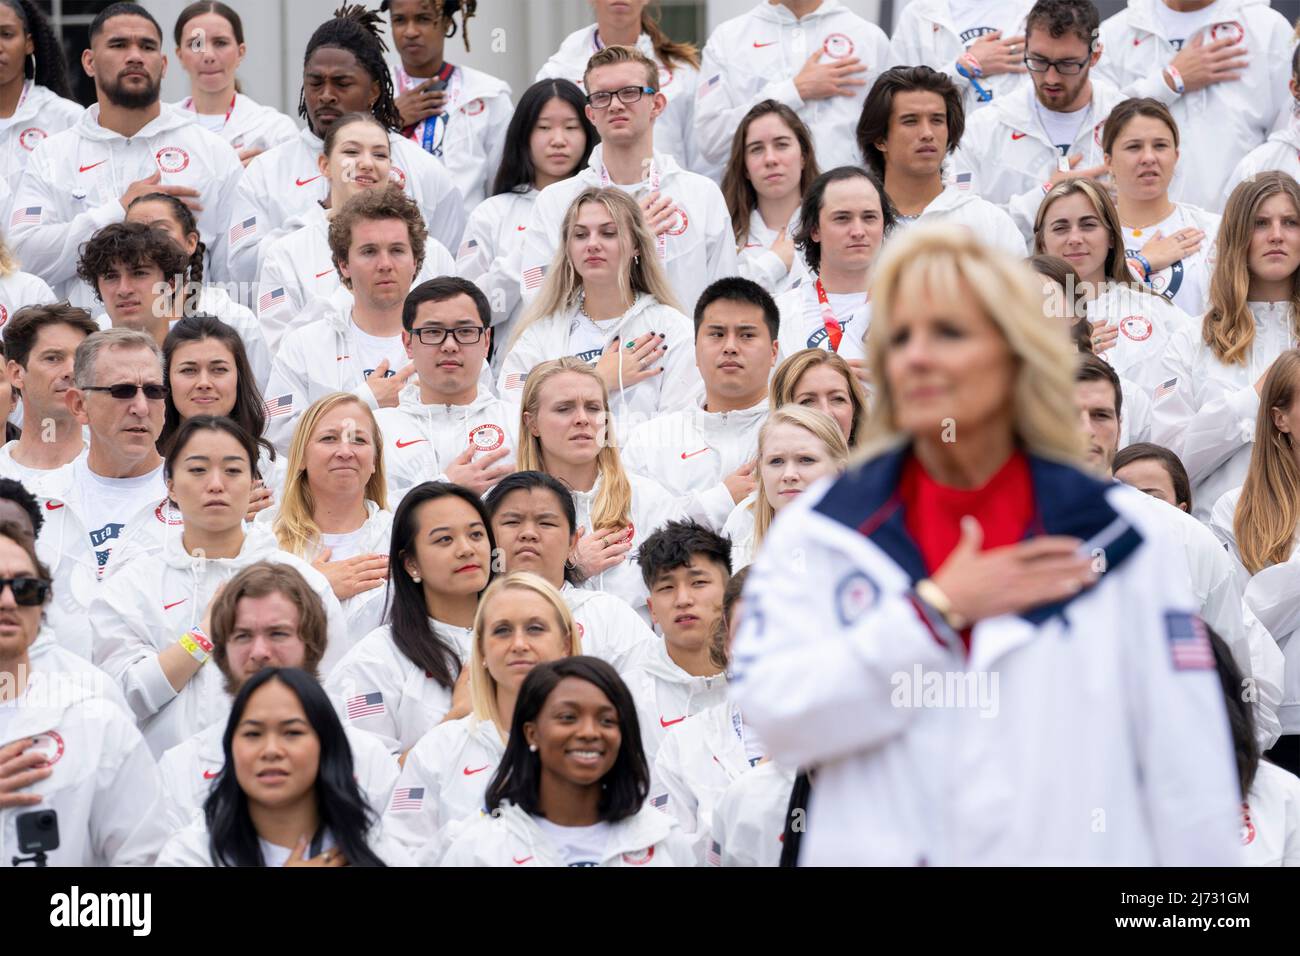 Washington, United States of America. 04 May, 2022. U.S. Olympic team athletes stand for the national anthem alongside First Lady Jill Biden during an event welcoming the athletes that participated in the Tokyo 2020 Summer Olympic and Paralympics, Beijing 2022 Winter Olympic and Paralympics, on the South Lawn of the White House, May 4, 2022 in Washington, D.C.  Credit: Cameron Smith/White House Photo/Alamy Live News Stock Photo